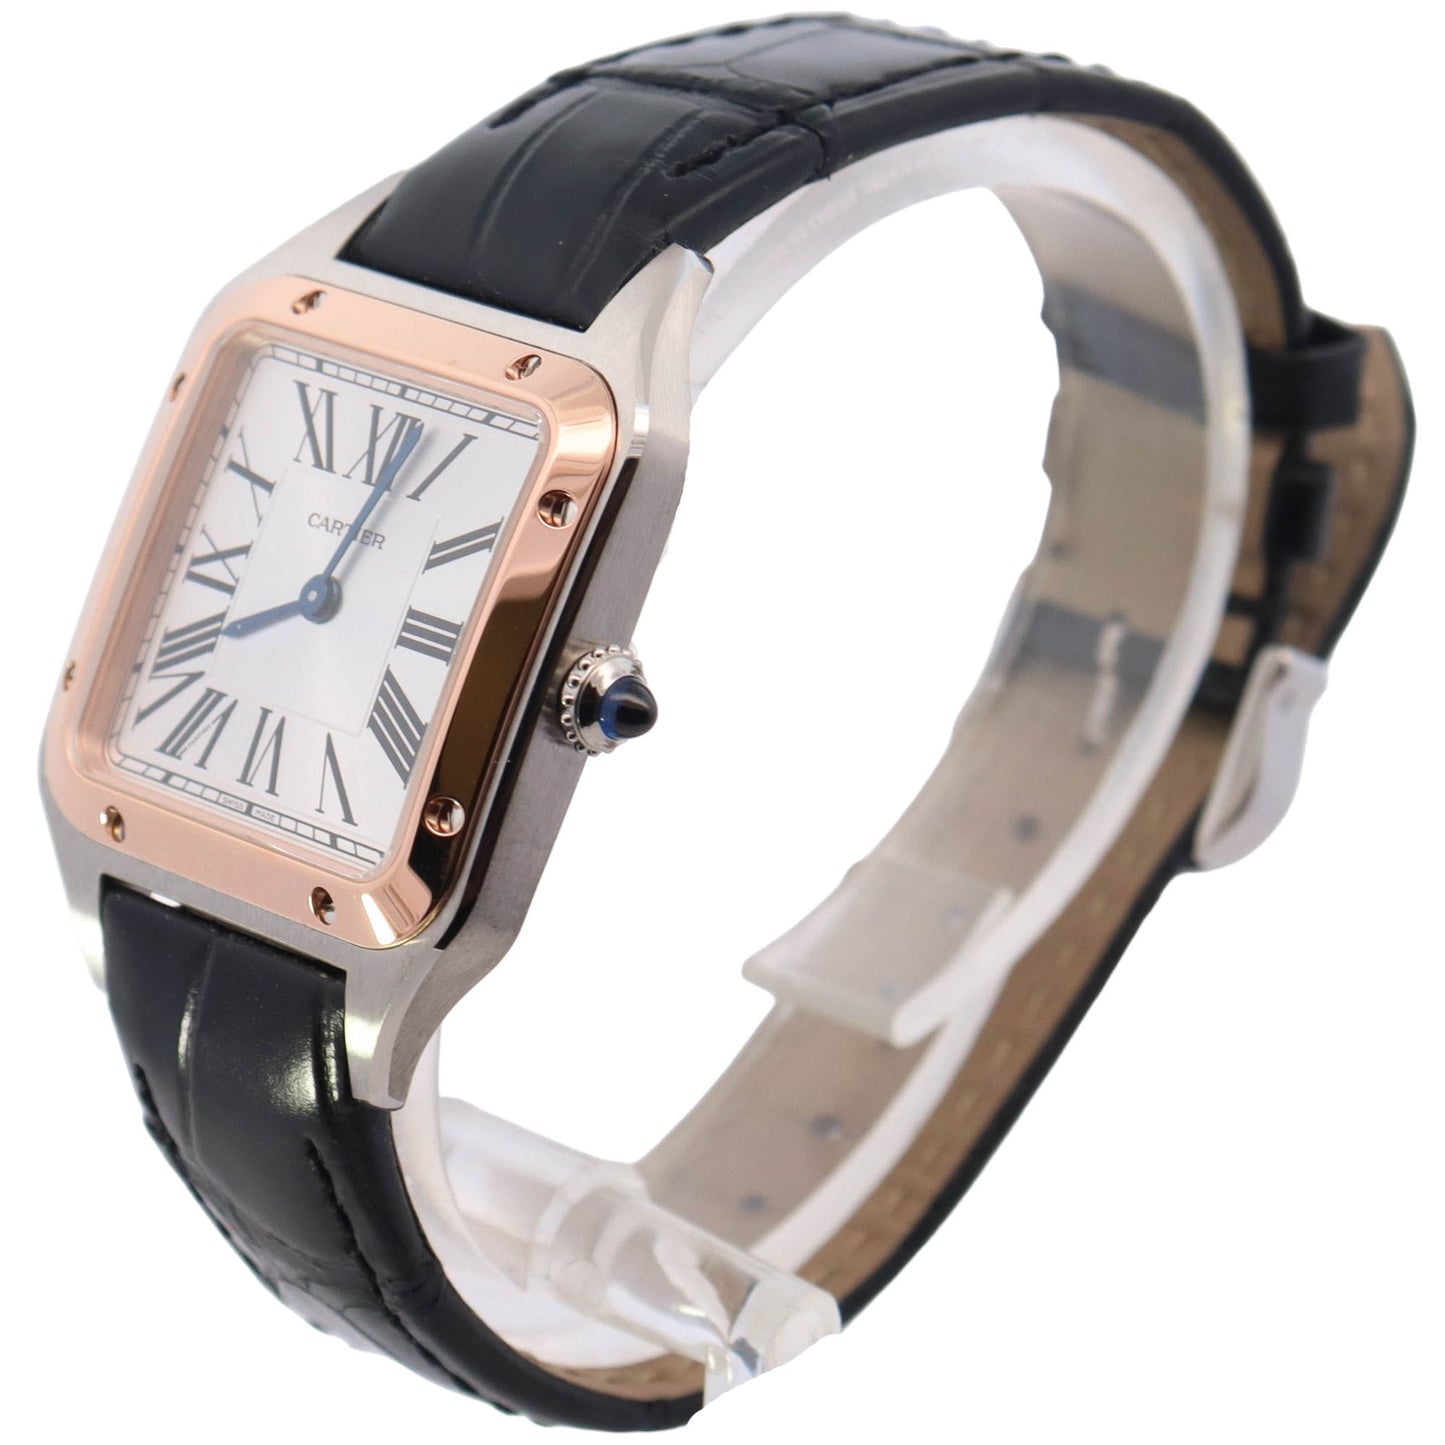 Cartier Santos Dumont Stainless Steel & Rose Gold 28mm X 38mm White Roman Dial Watch Reference# W2SA0012 - Happy Jewelers Fine Jewelry Lifetime Warranty